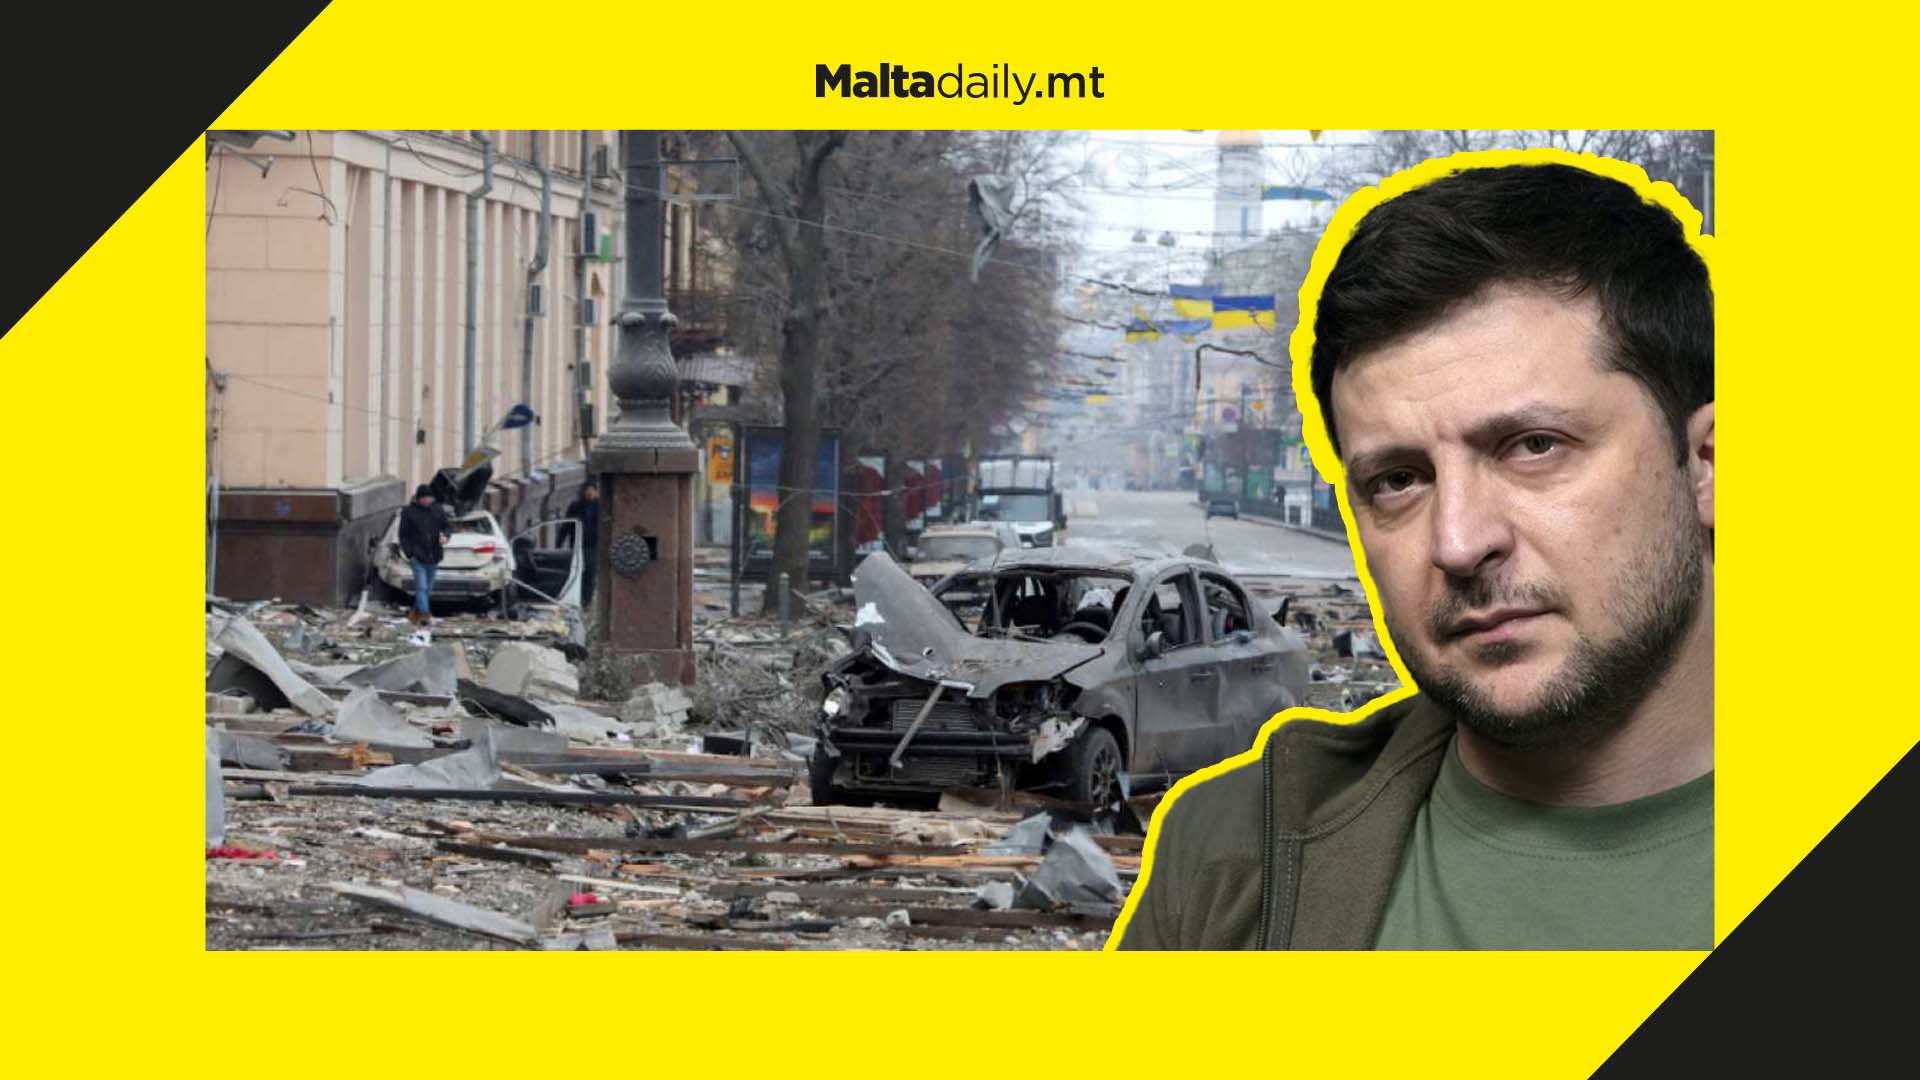 "This war has left $600 billion in damages", says Volodymyr Zelenskyy